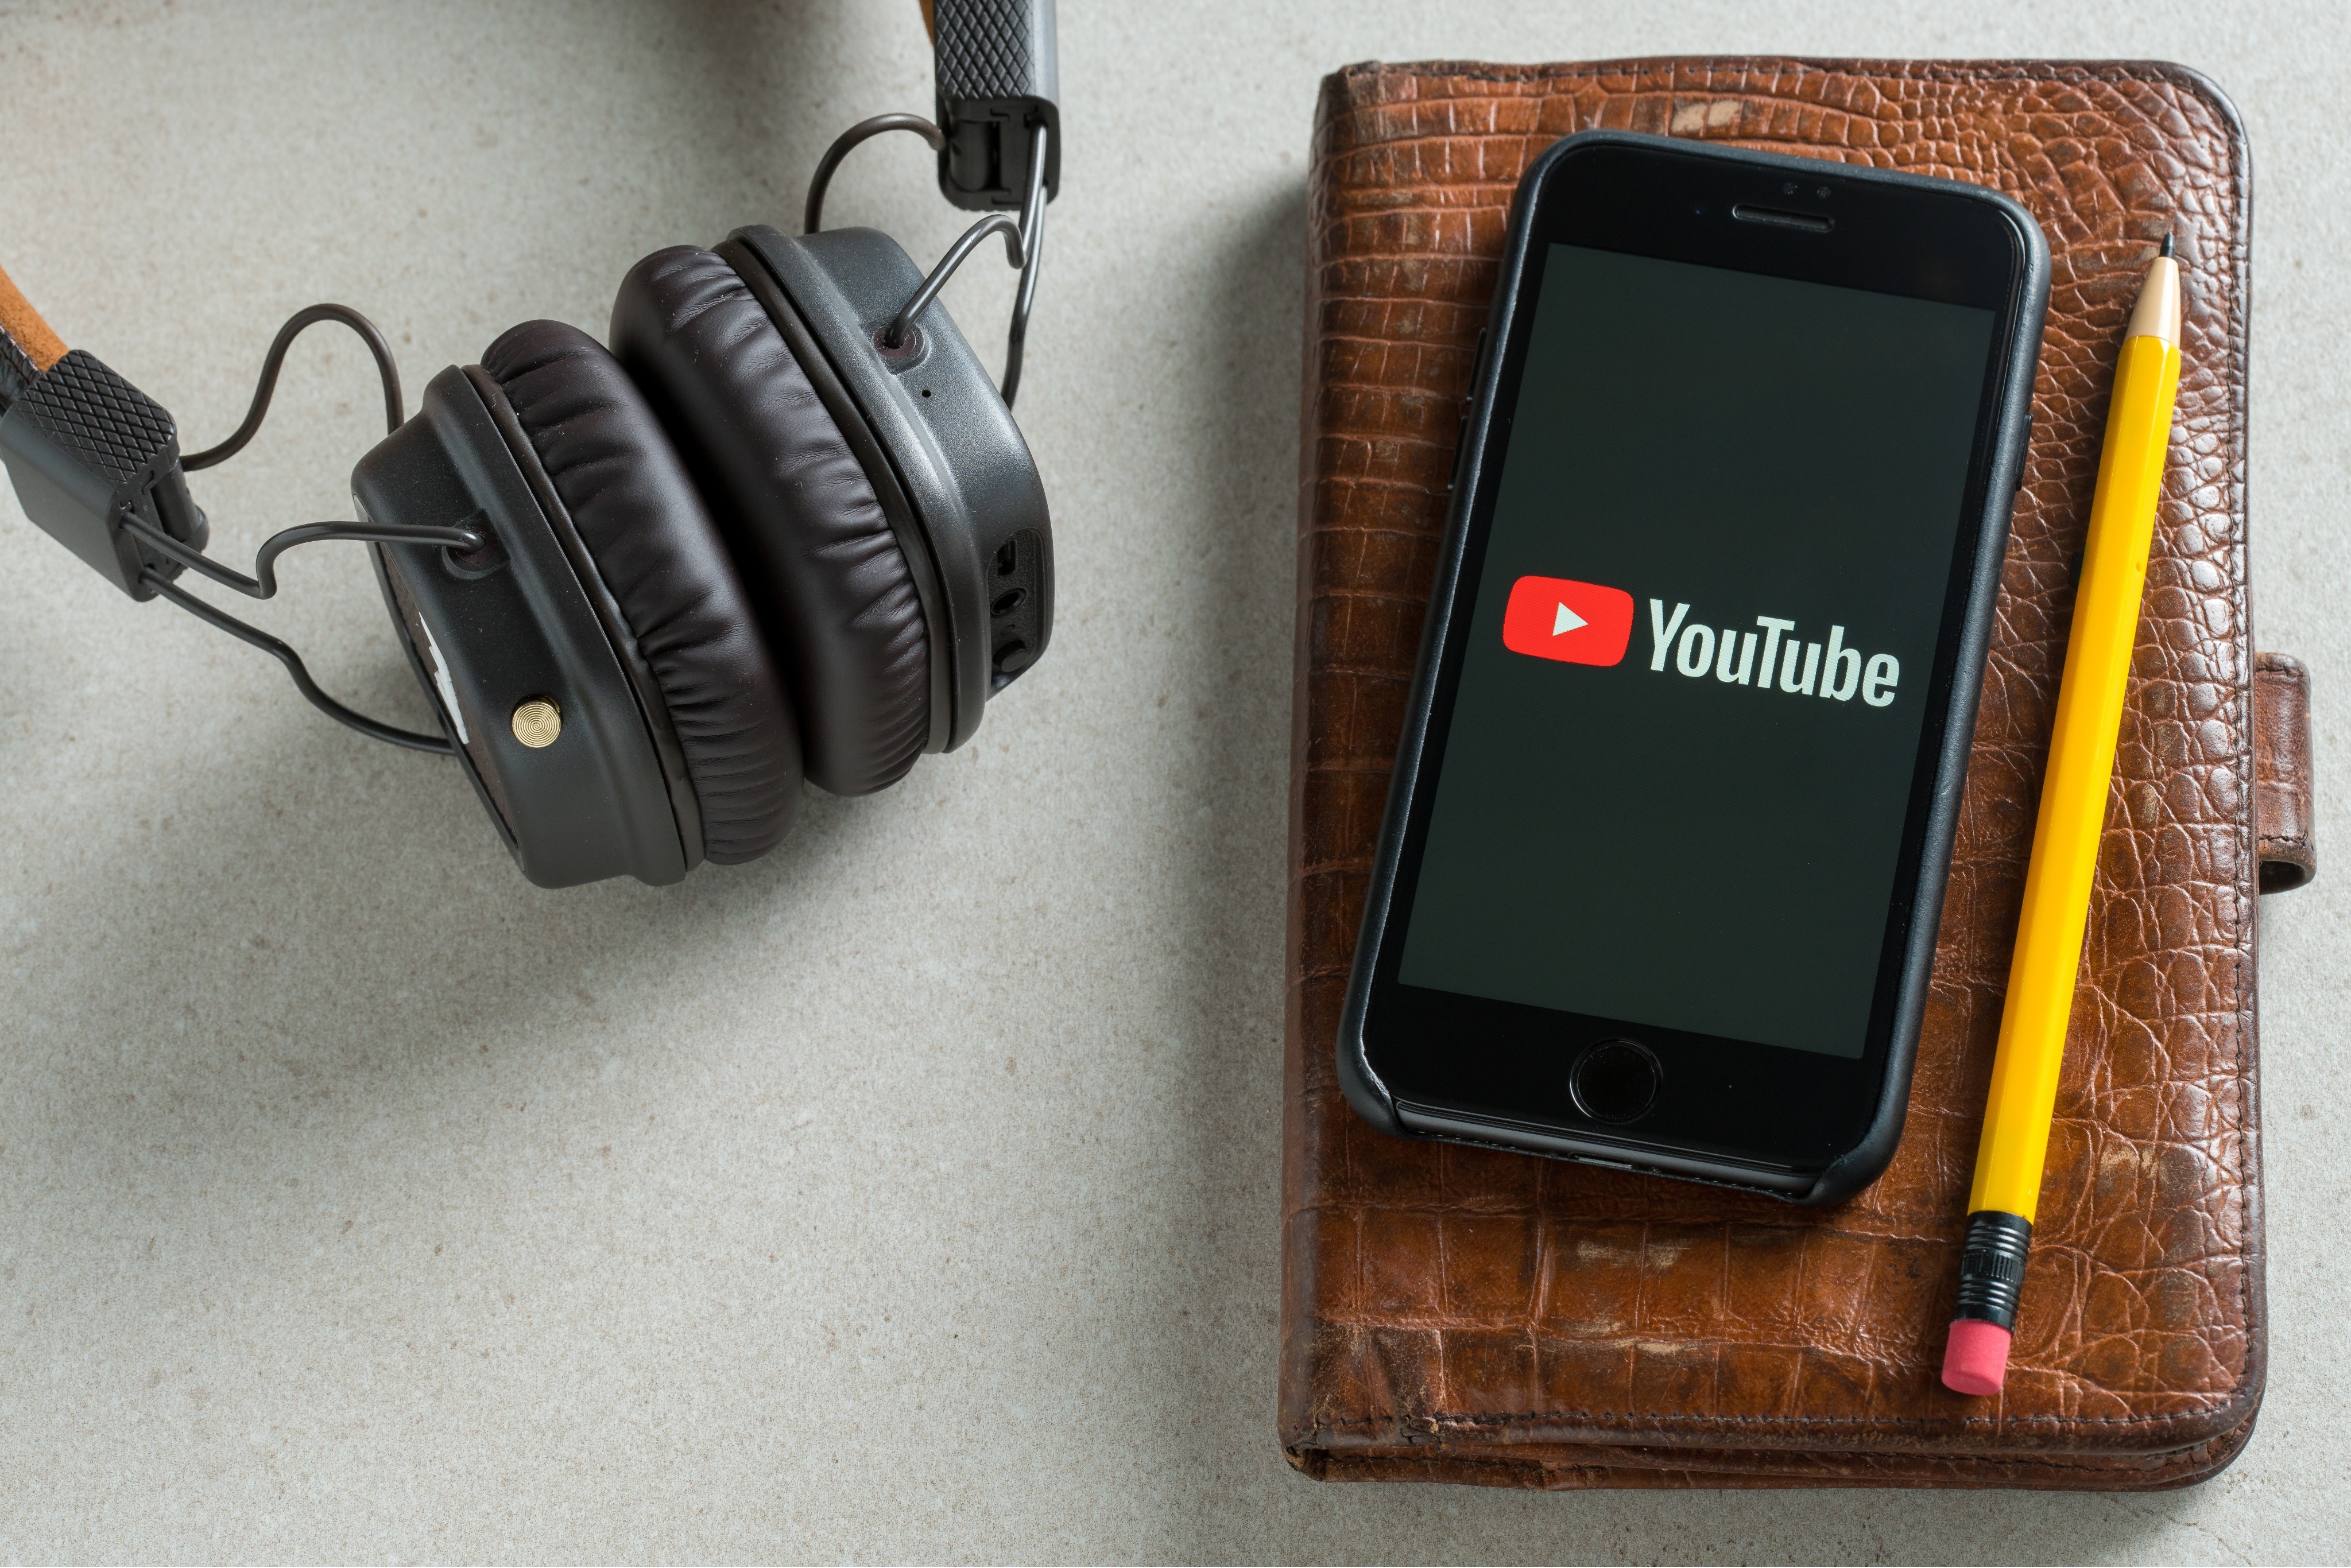 
Best practices for promoting your music on YouTube